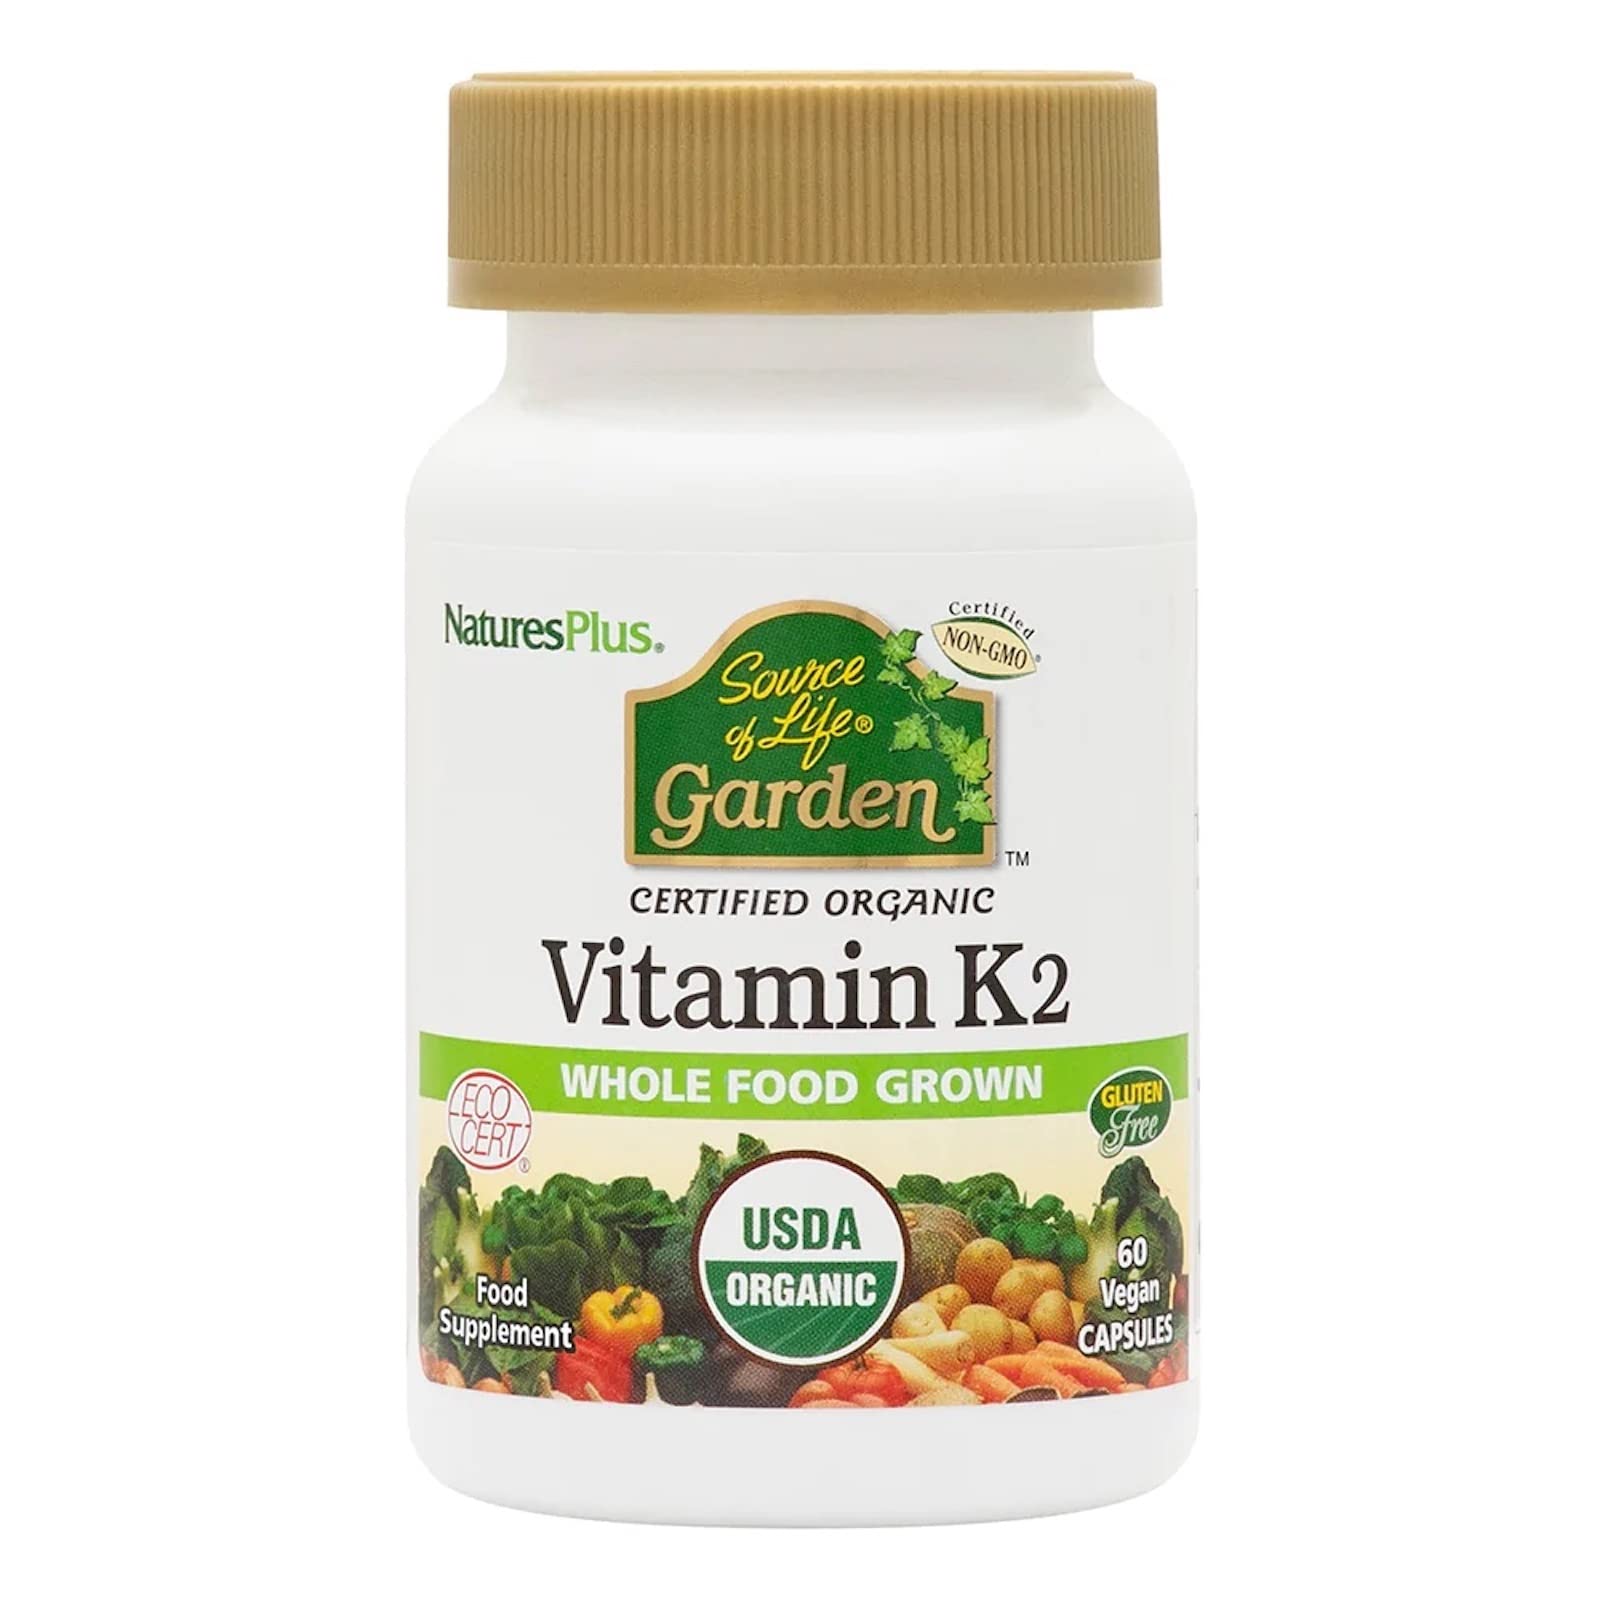 Book Cover NaturesPlus Source of Life Garden Certified Organic Vitamin K2-120 mcg, 60 Vegan Capsules - Bone Health Supplement - with Natural Whole Food Enzymes - Vegetarian, Gluten-Free - 60 Servings 60 Count (Pack of 1)